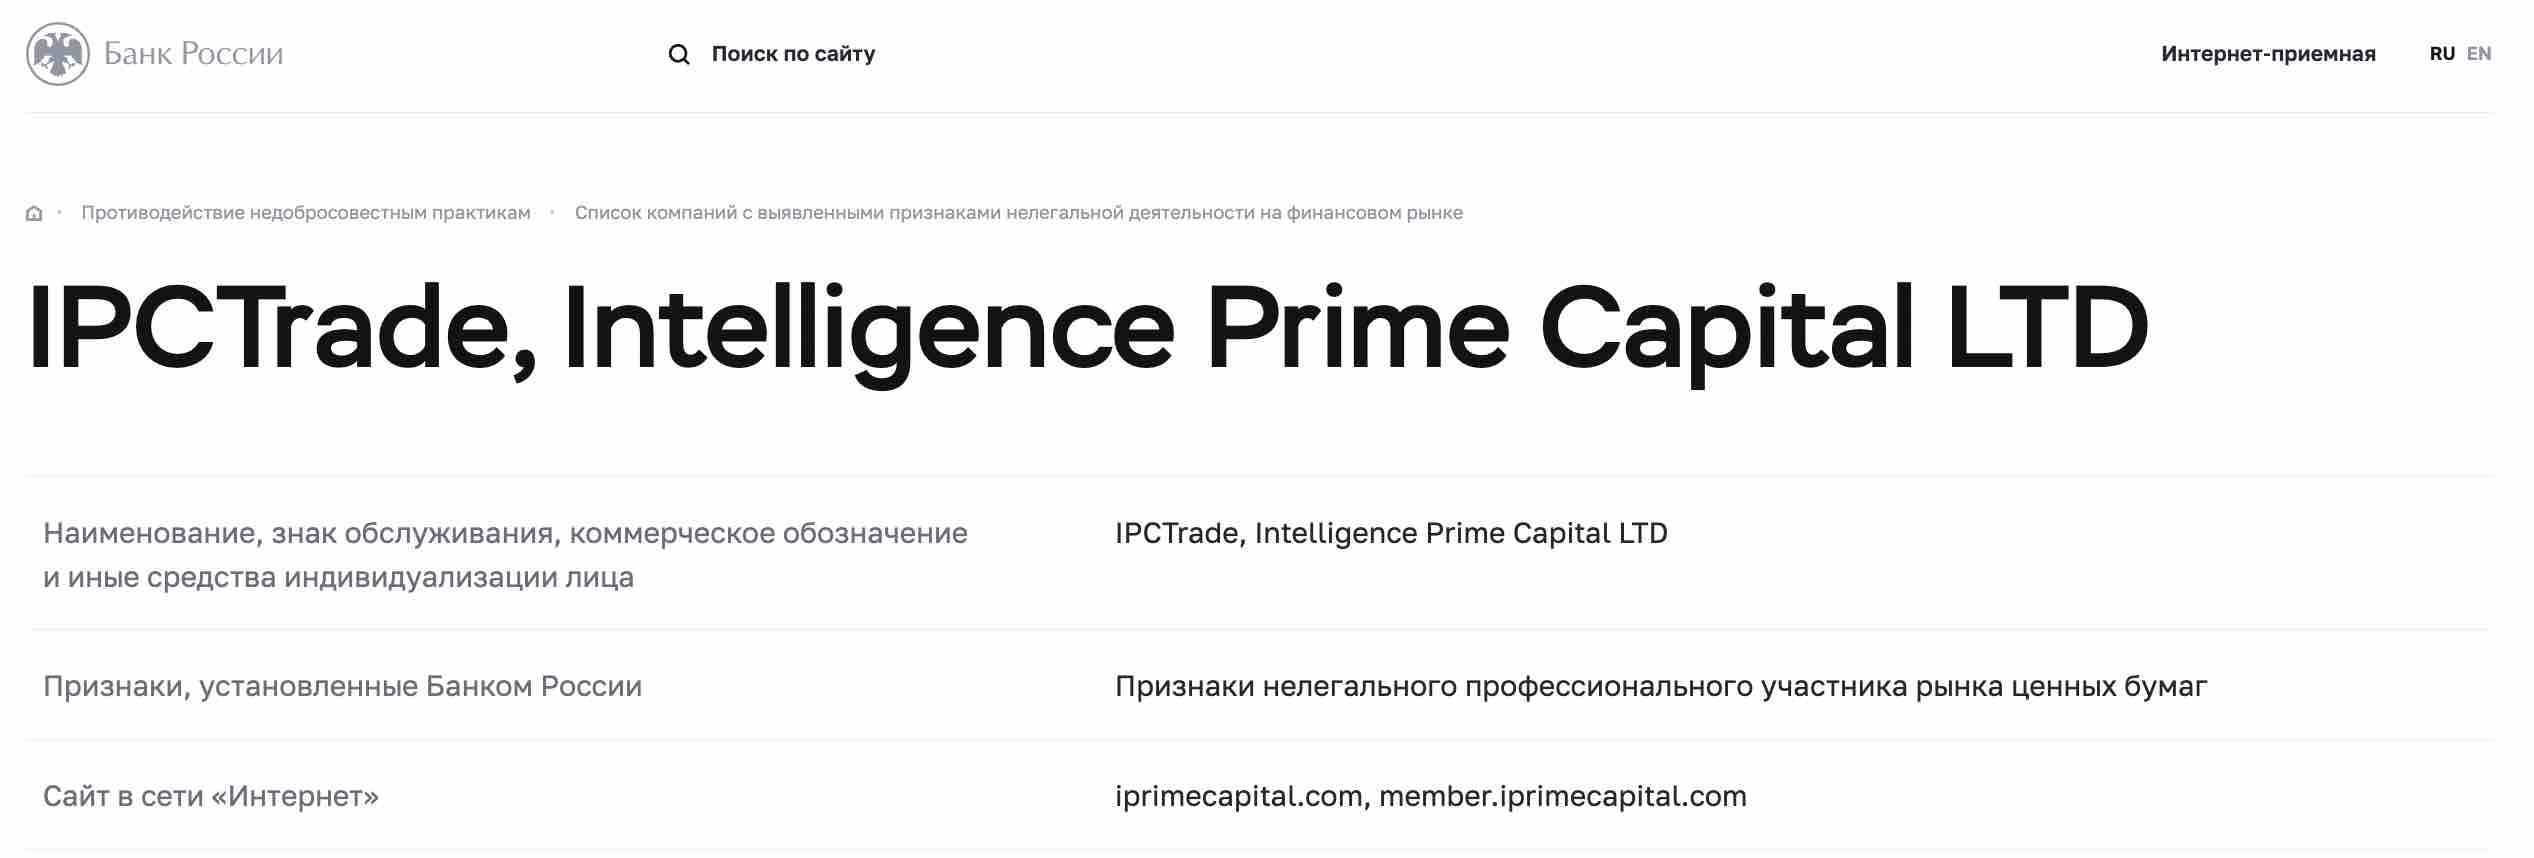 is intelligence Prime capital a scam russian bank cliam